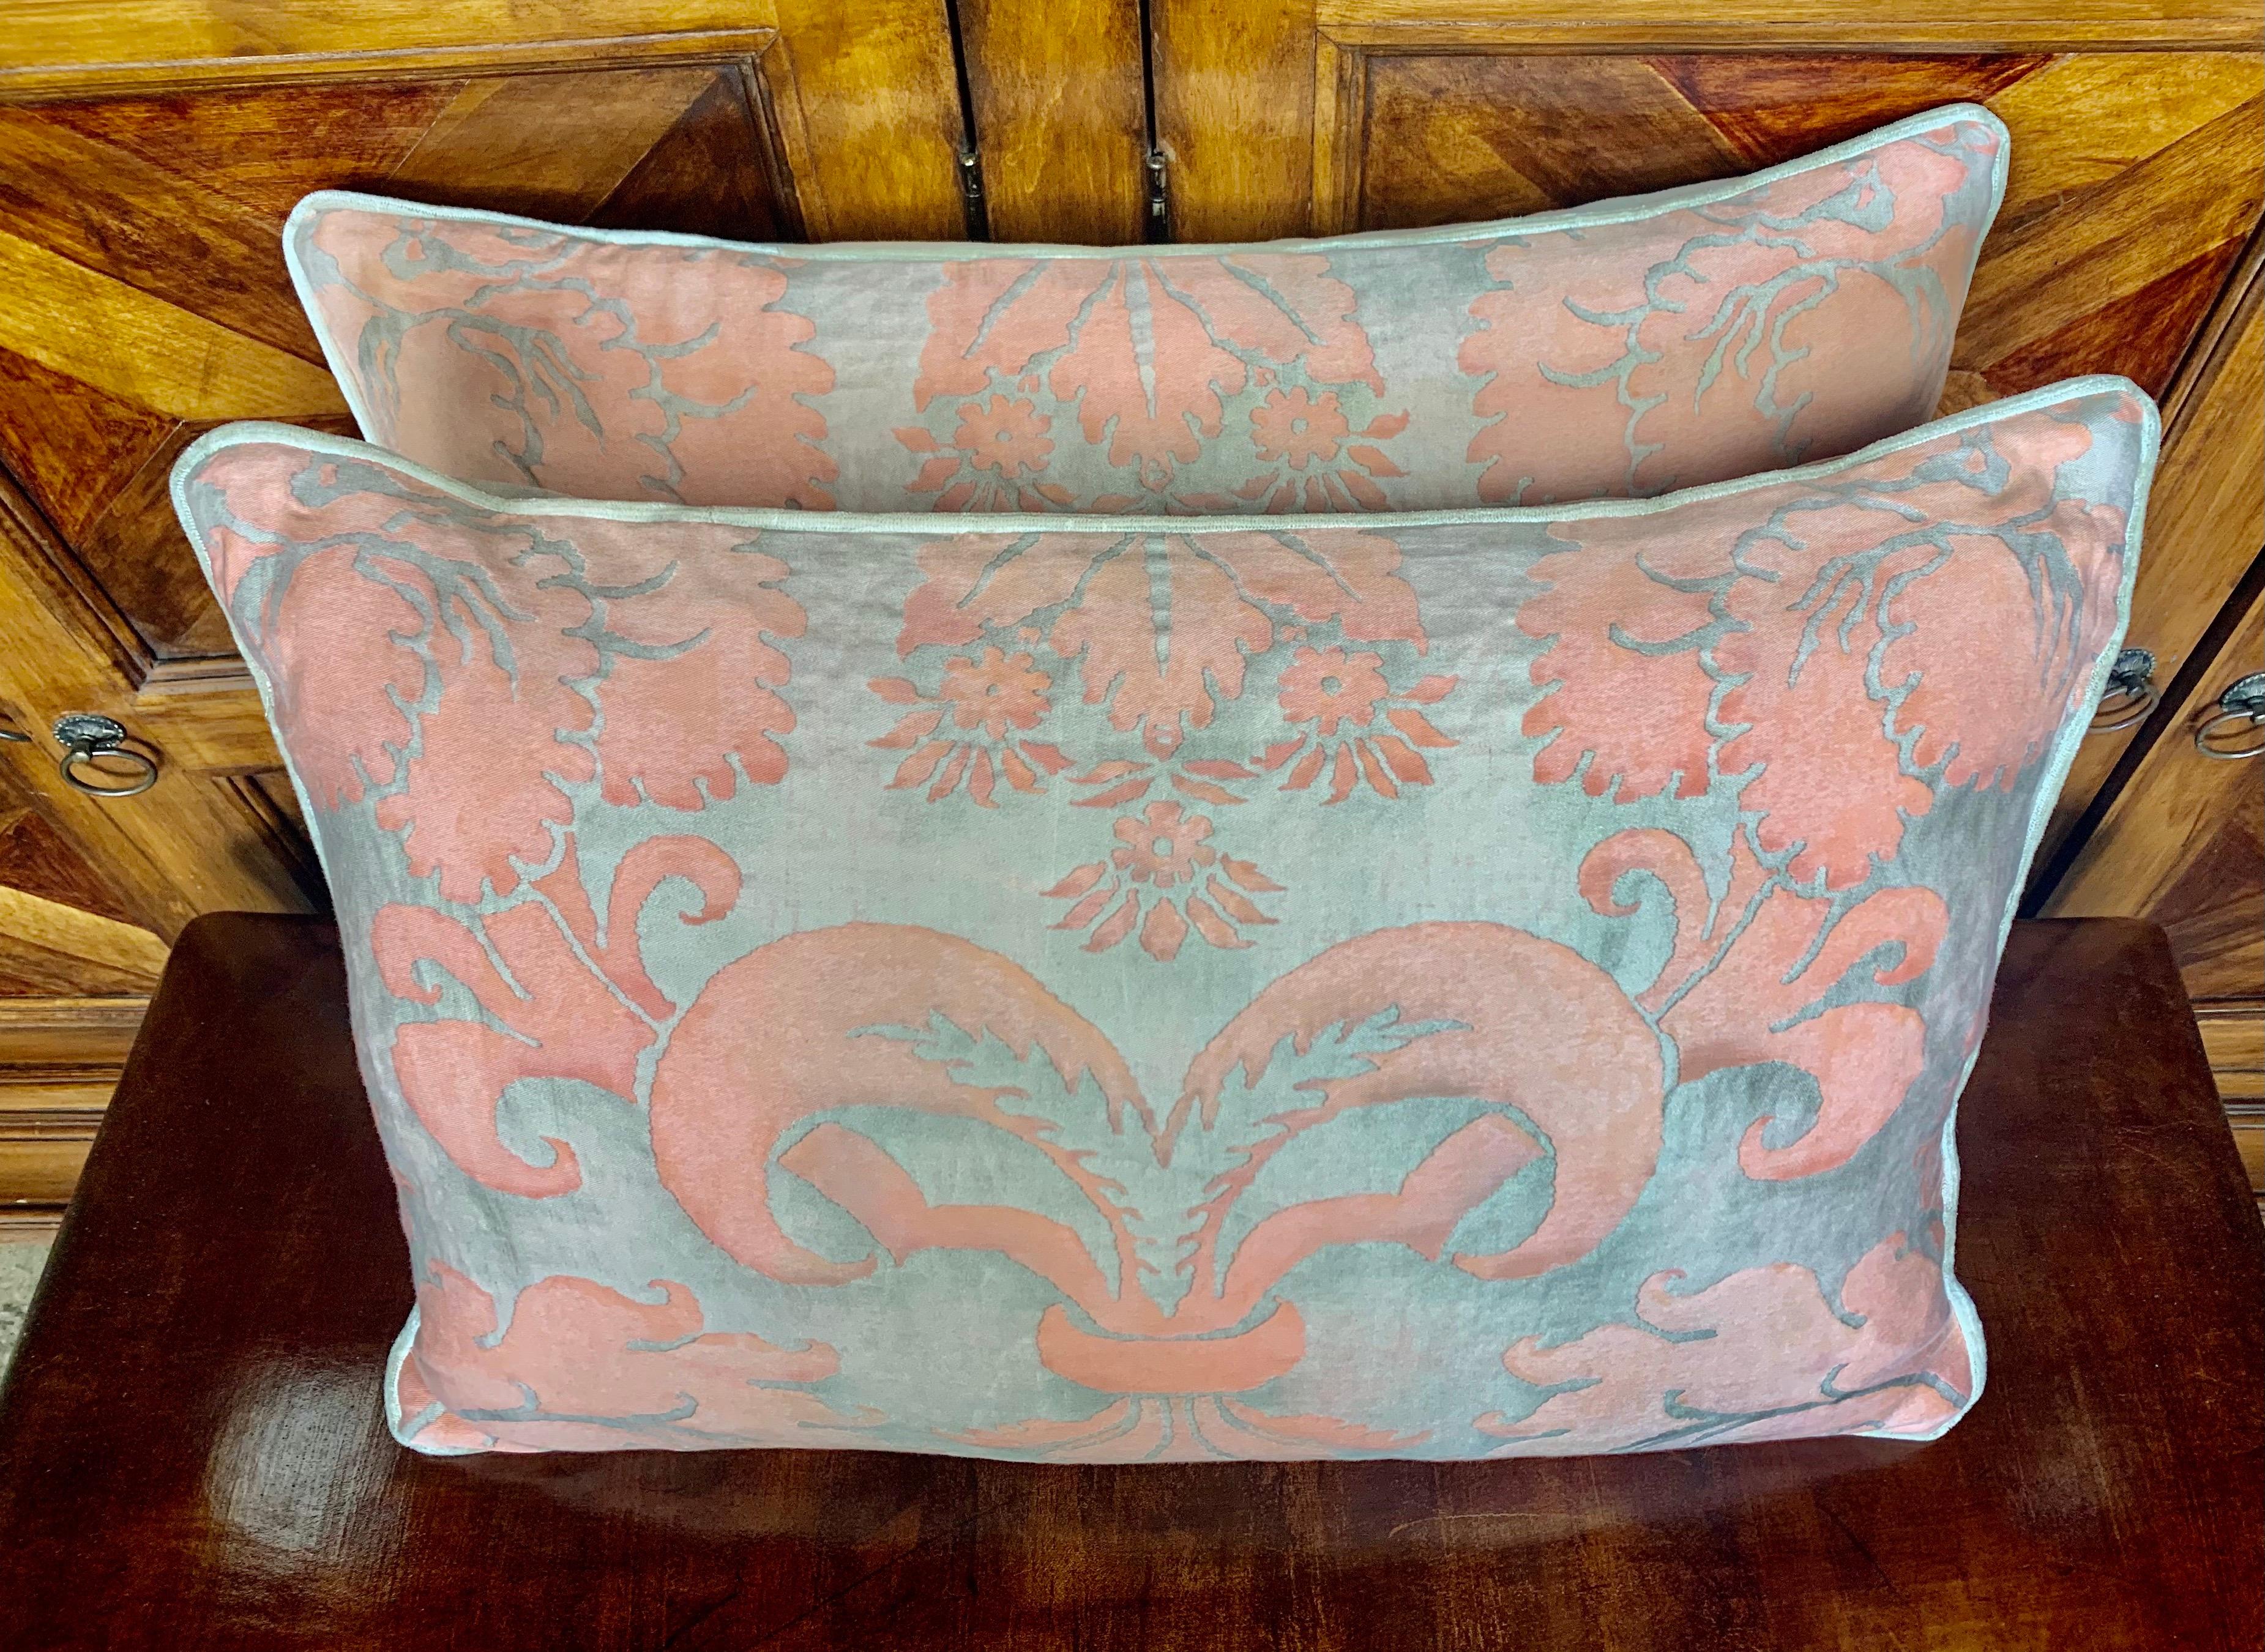 Cotton Pair of Vintage Glicine Patterned Fortuny Textile Pillows